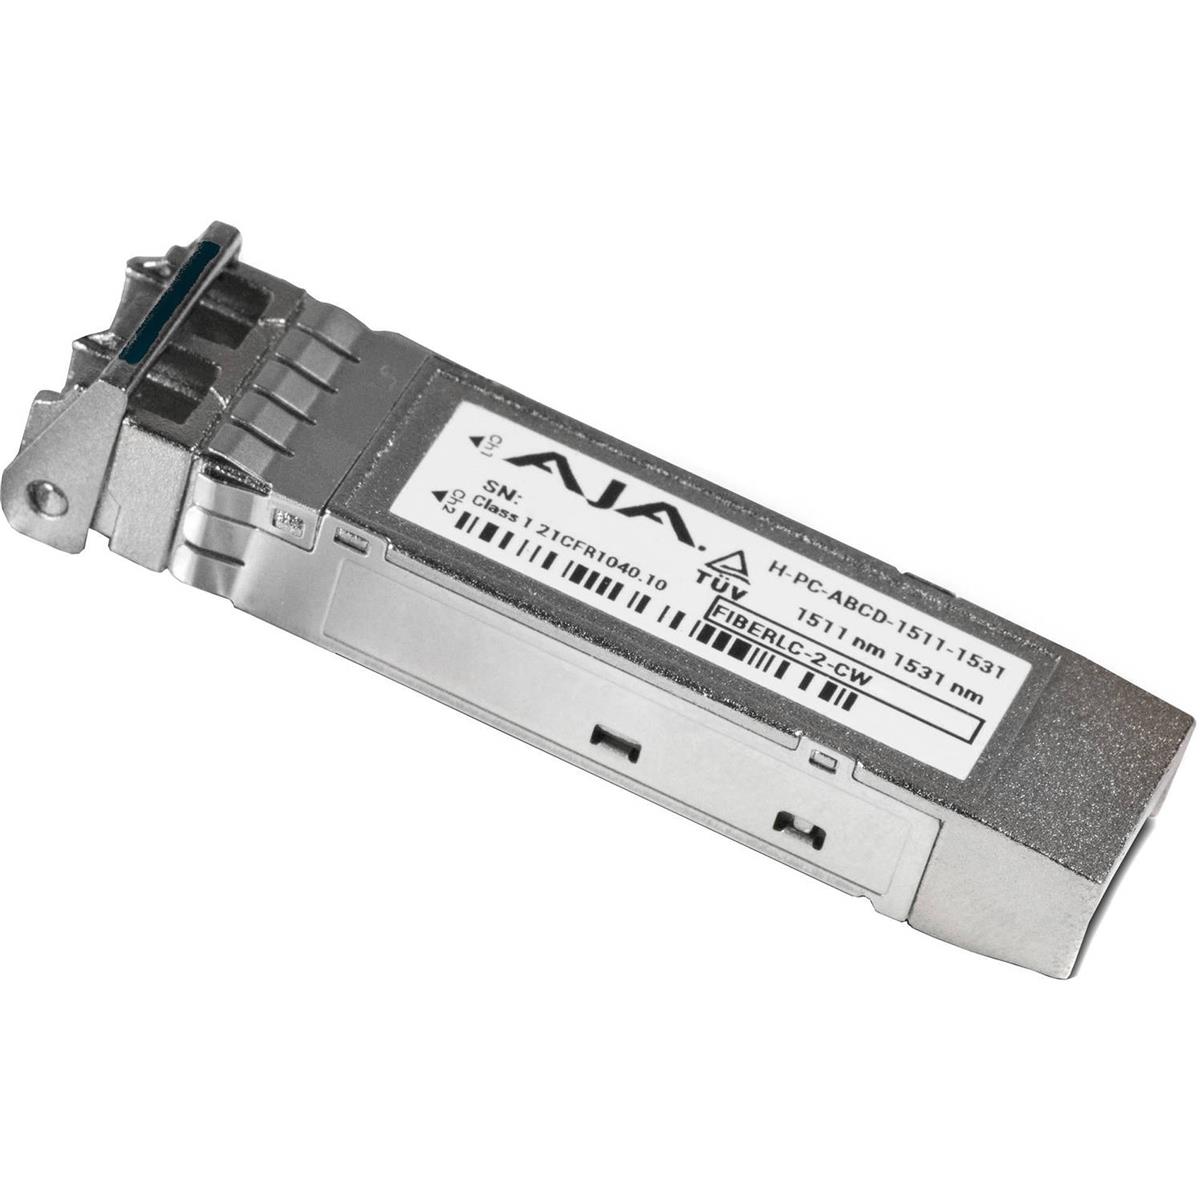 Image of AJA CWDM Small Form-Factor Pluggable Module with LC Connector